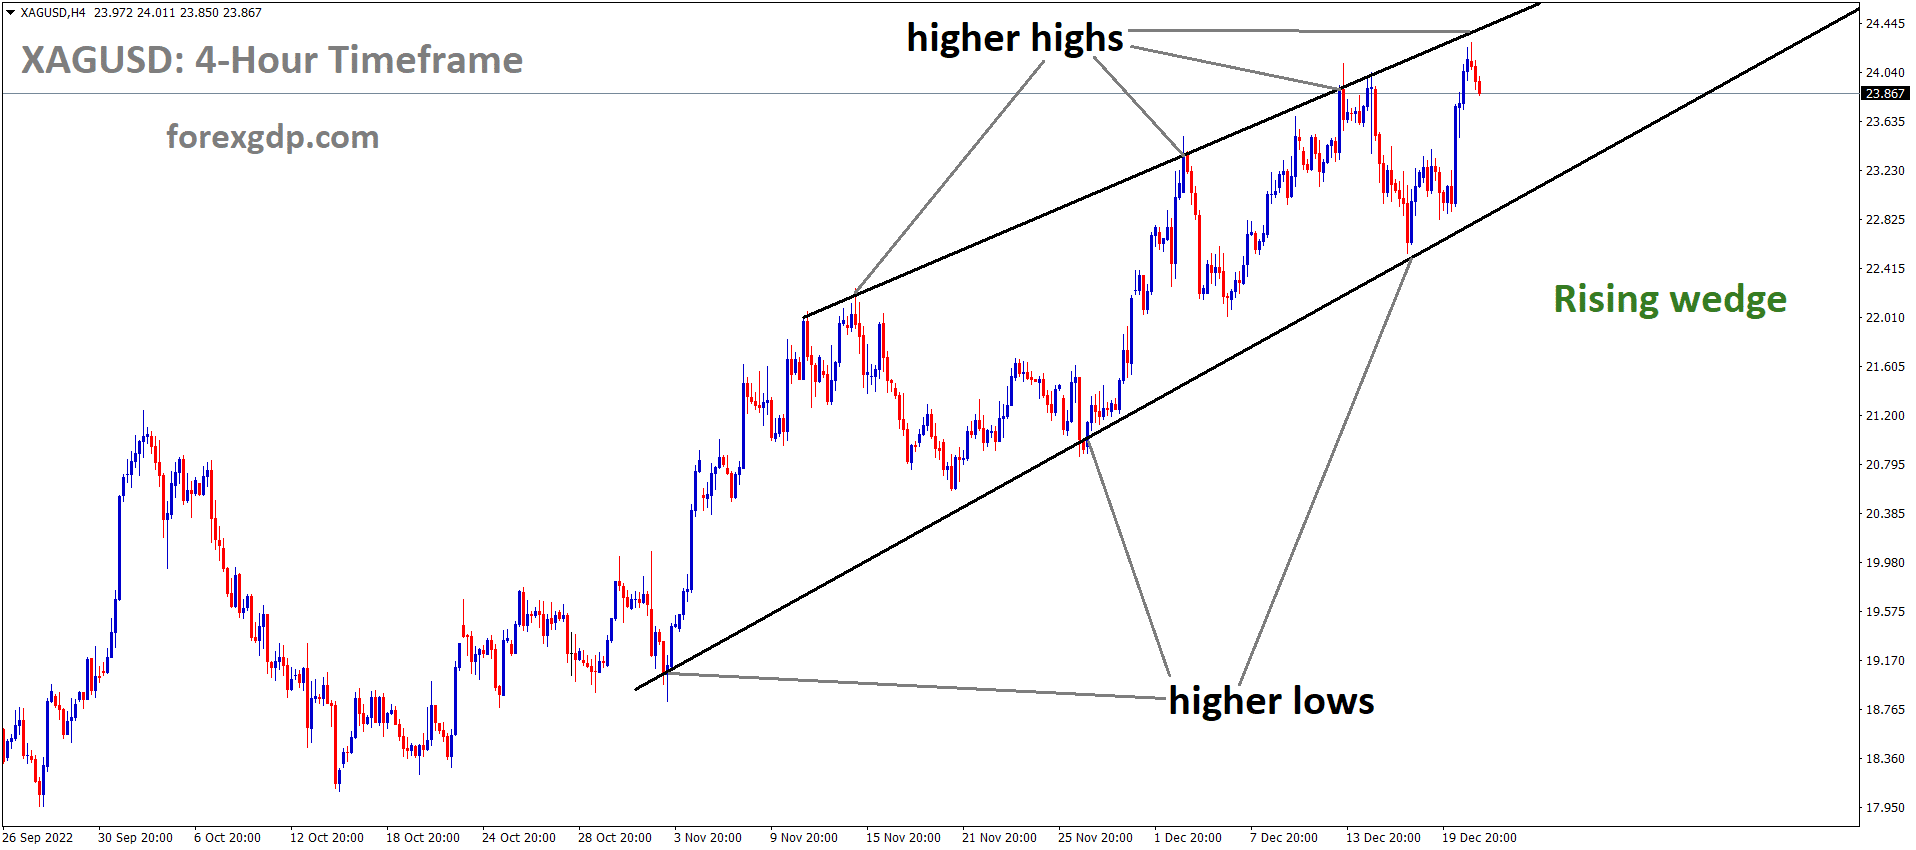 XAGUSD Silver Price is moving in the Rising wedge pattern and the market has fallen from the higher high area of the pattern